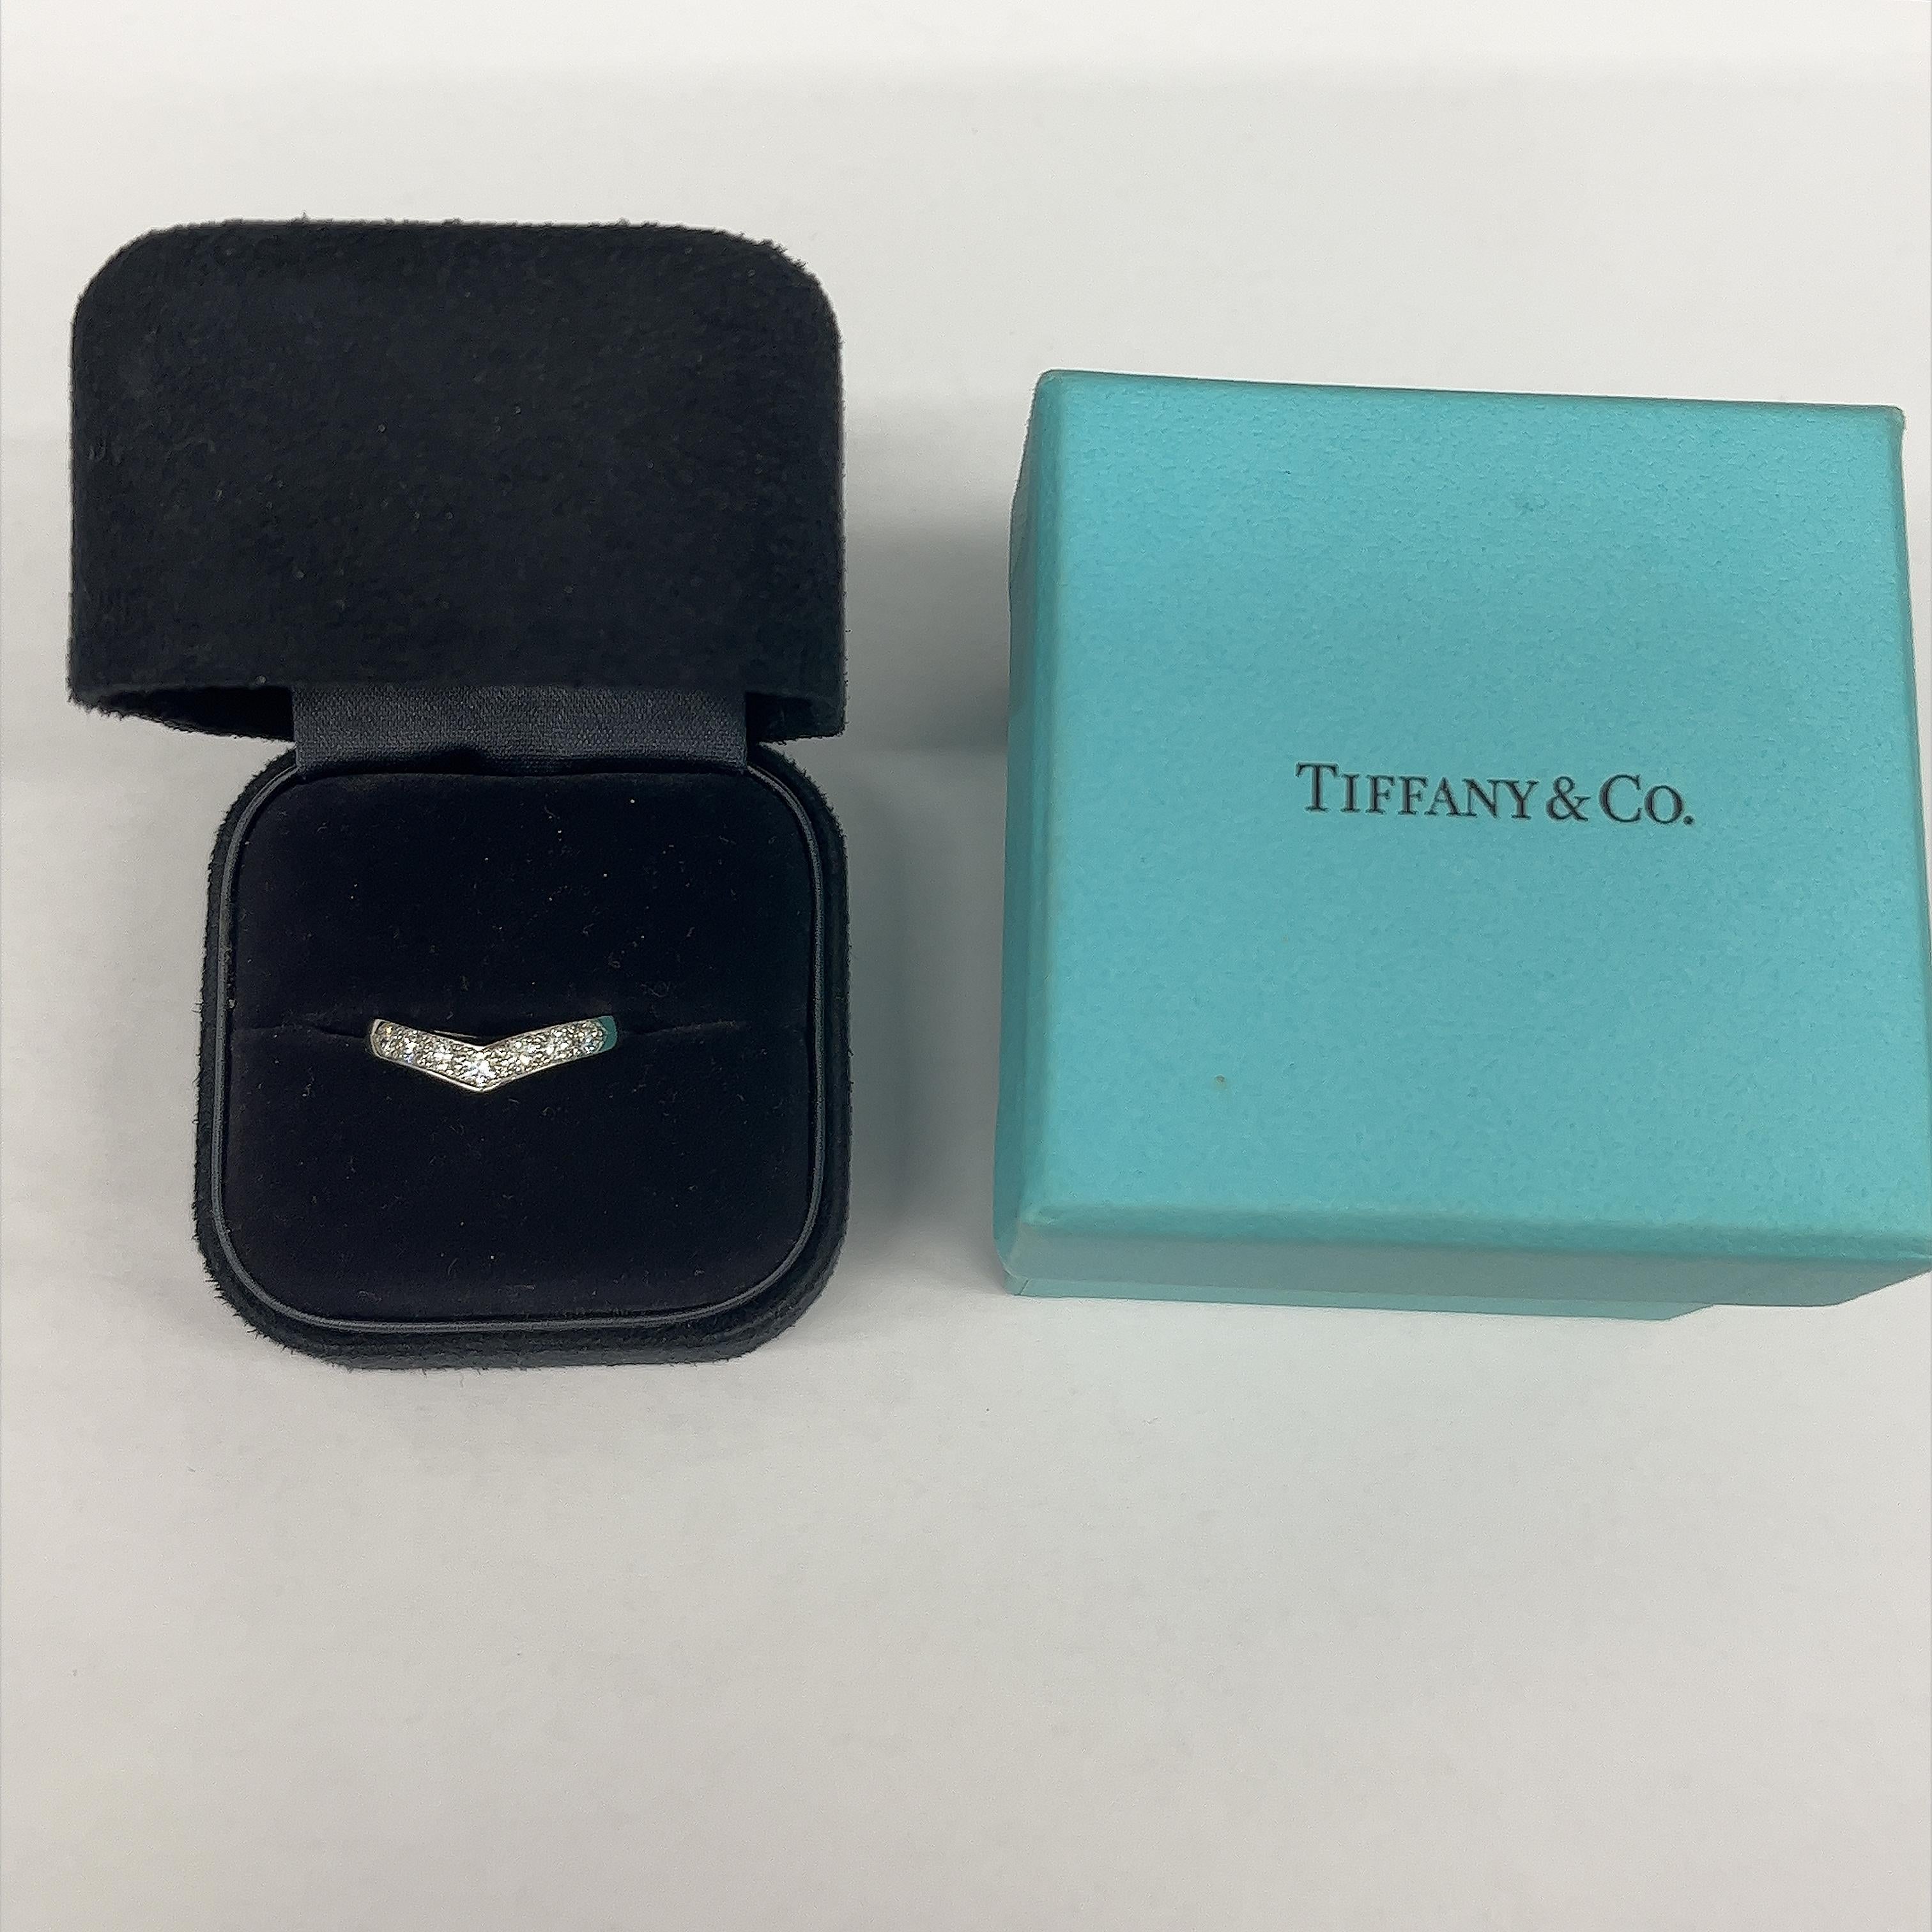 Tiffany & Co. Diamond Anniversary ring set in Platinum with 7 diamonds, 0.35ct For Sale 3